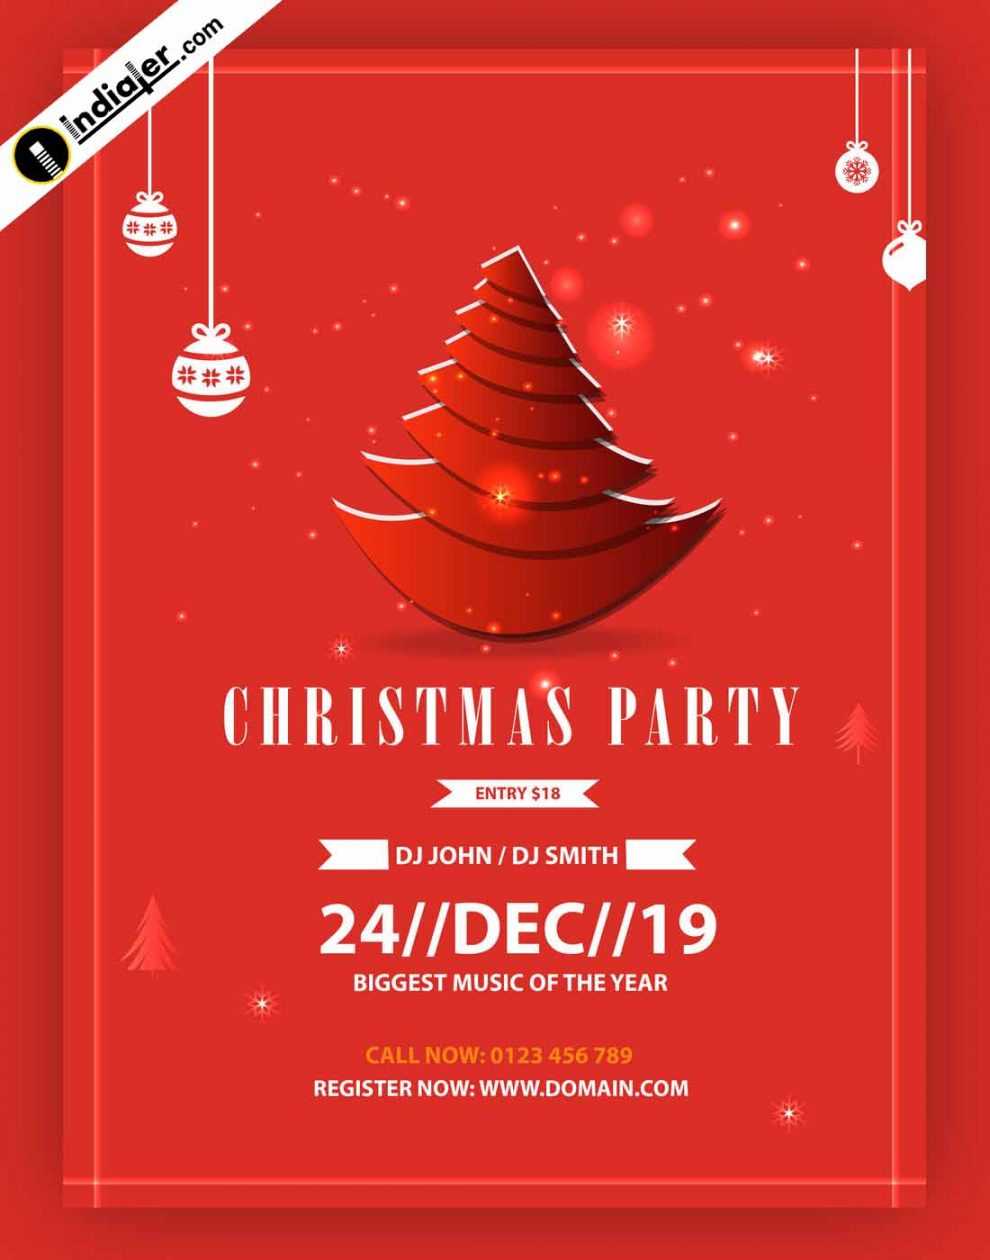 Free Printable Christmas Party Flyer Ates Or Invitations Uk With Regard To Free Christmas Invitation Templates For Word